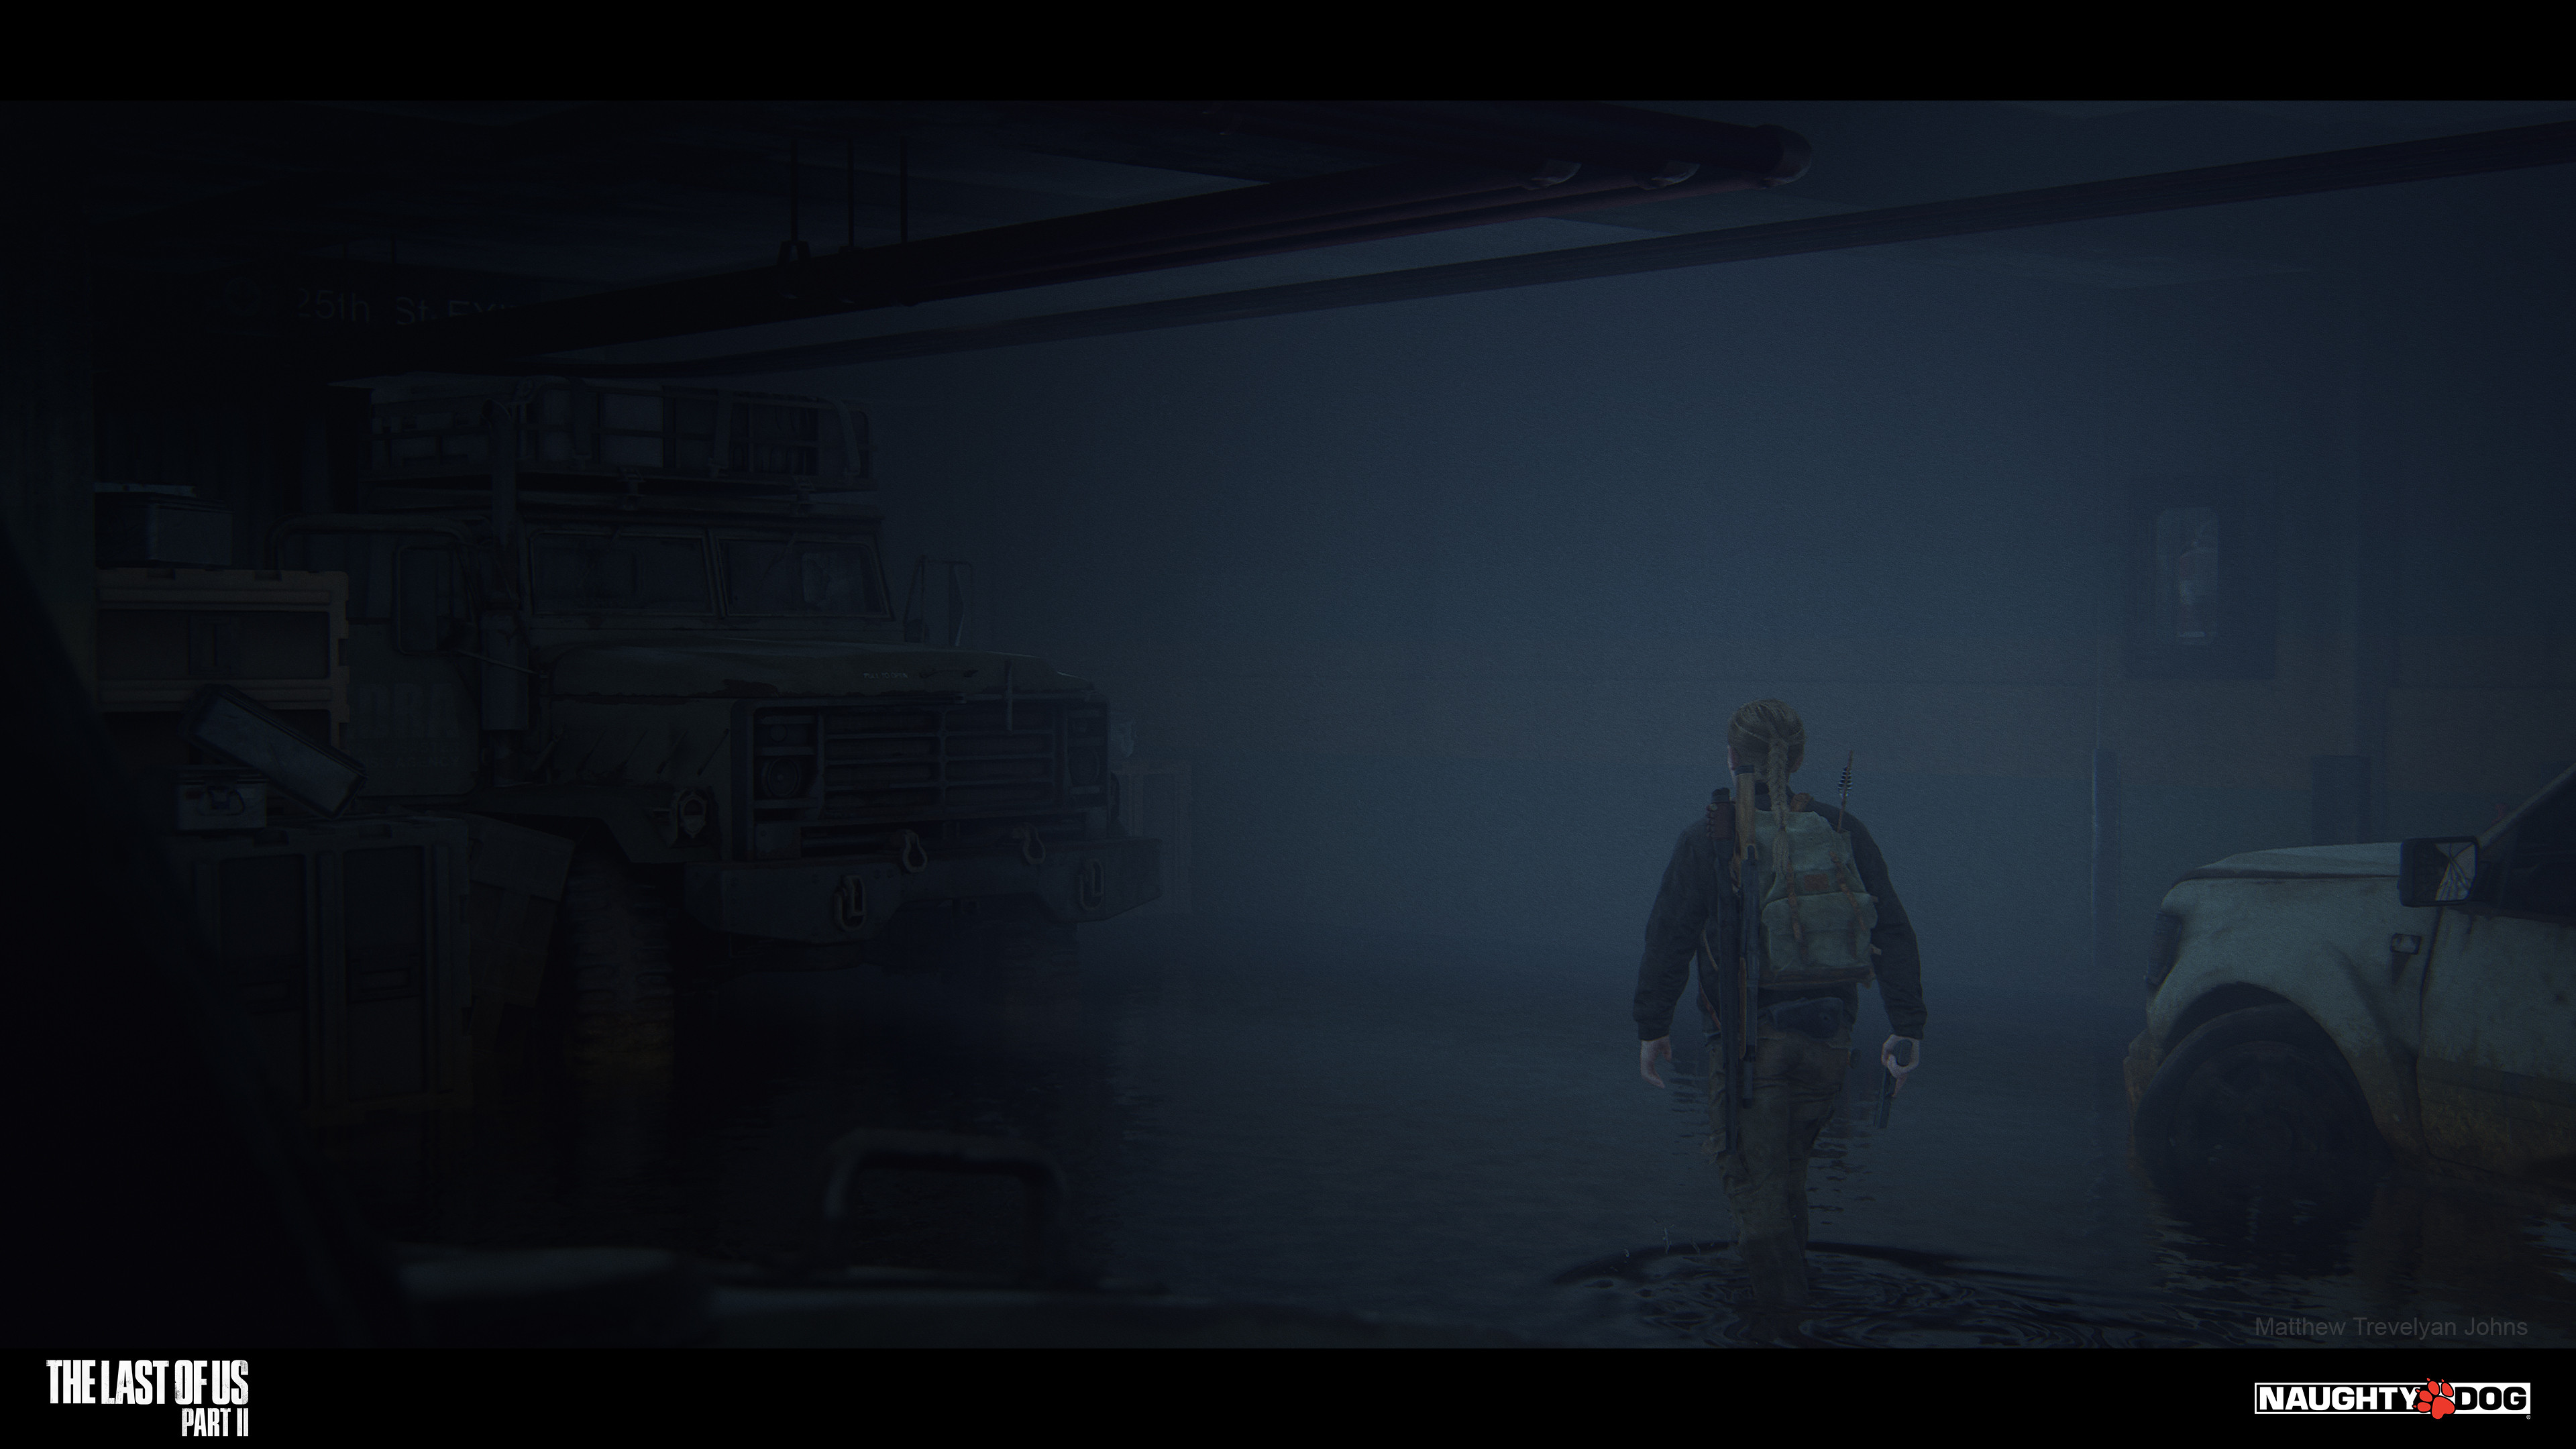 Exiting the Morgue Abby finds herself in a flooded parking garage, a final opportunity for me to make use of my library of submerged shader vehicles and wetness blends